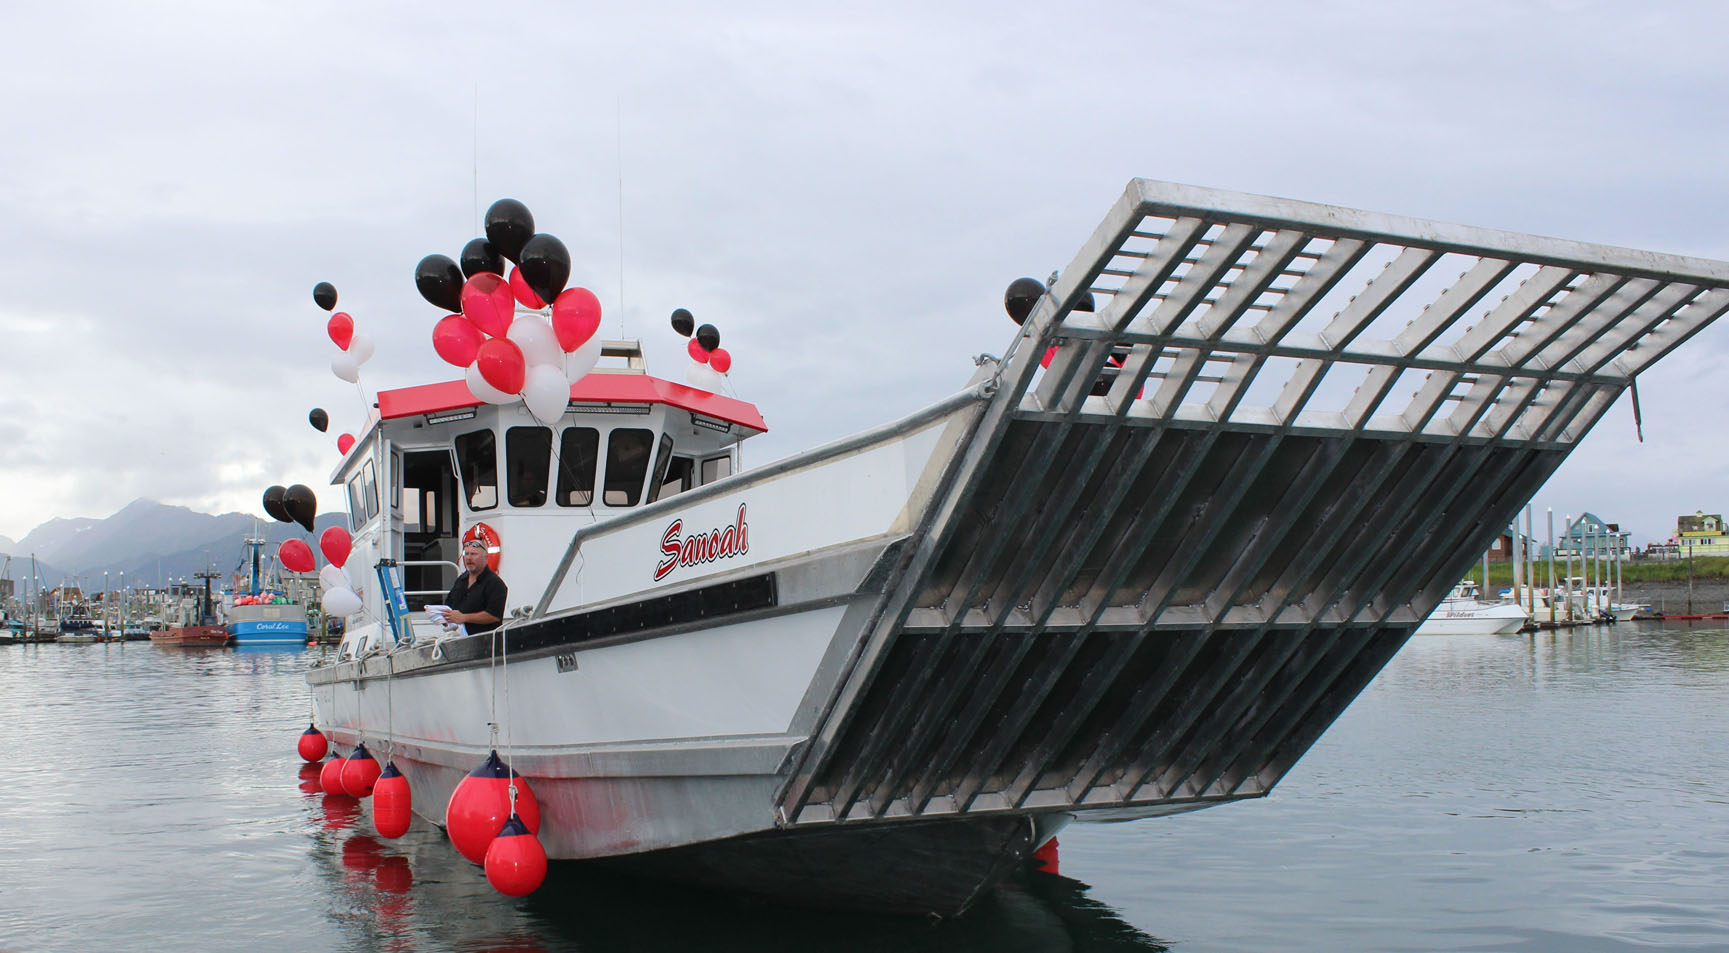 the 42-foot M/V Sanoah was decked out in balloons Sunday for a celebration of its christening. It also was owner Steve Attleson’s 50th birthday. -Photos by McKibben Jackinsky, Homer News